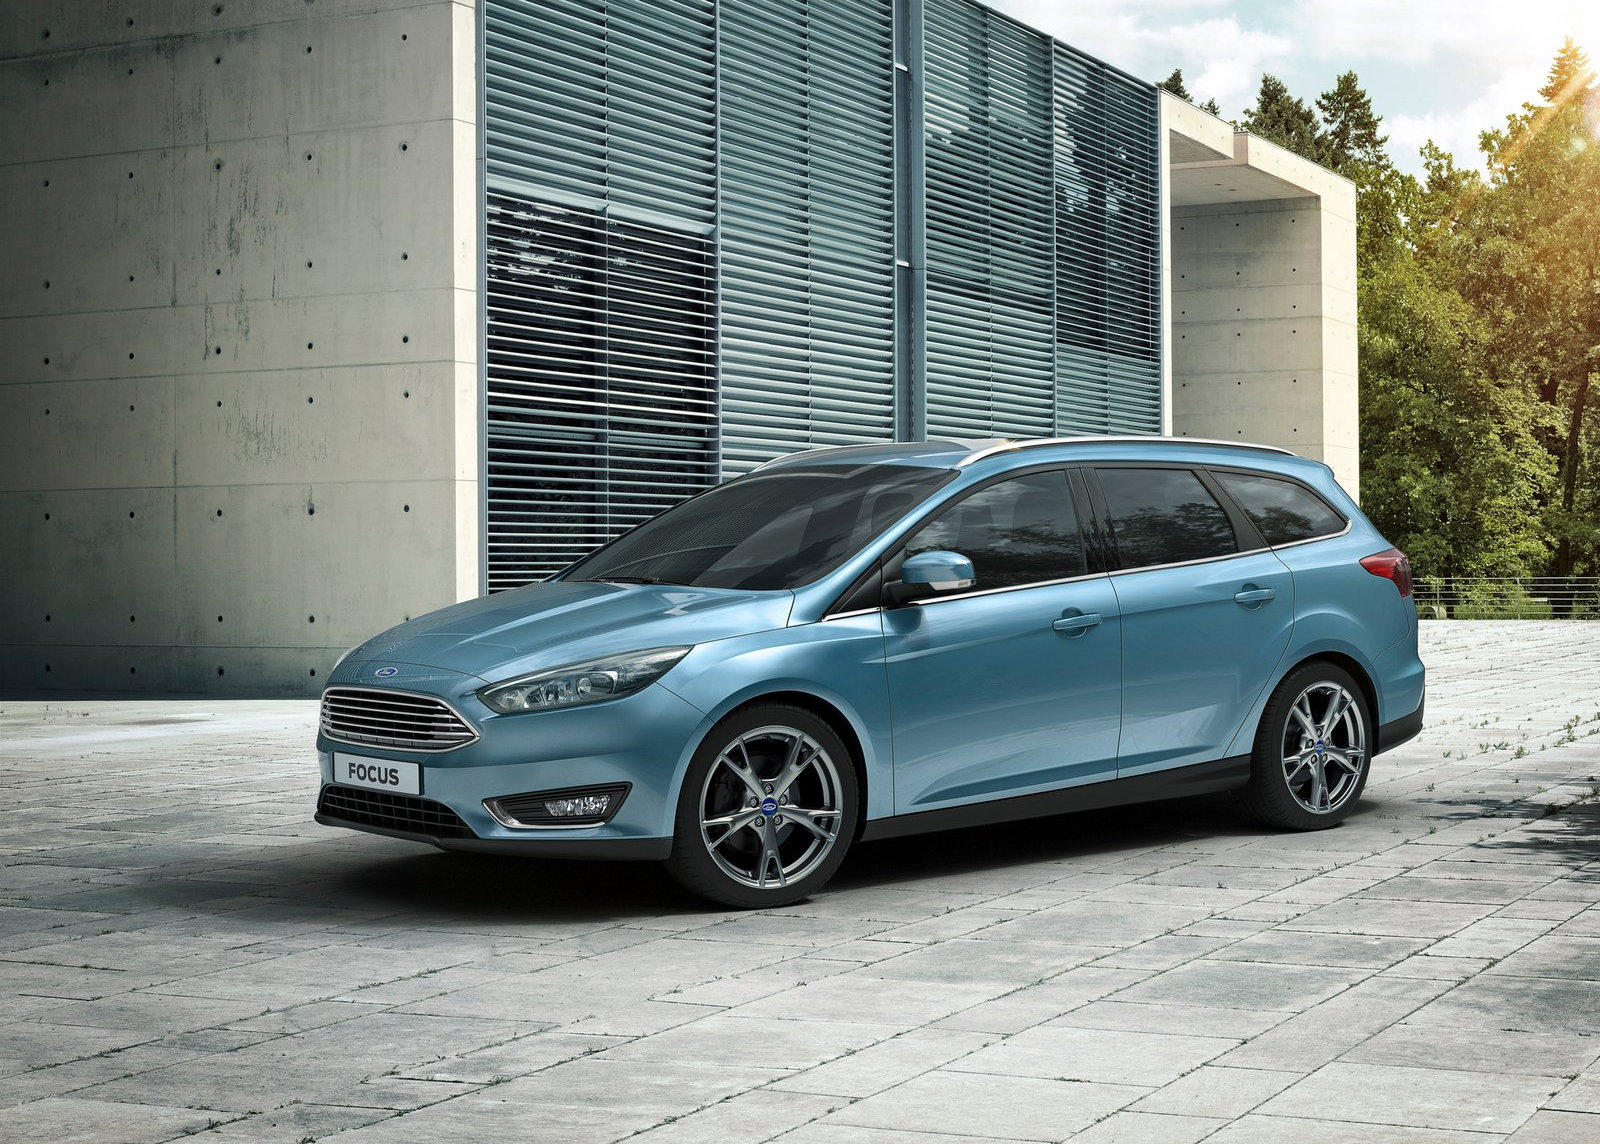 2015 Ford Focus Pricing for Europe Starts From €18,750 [Video